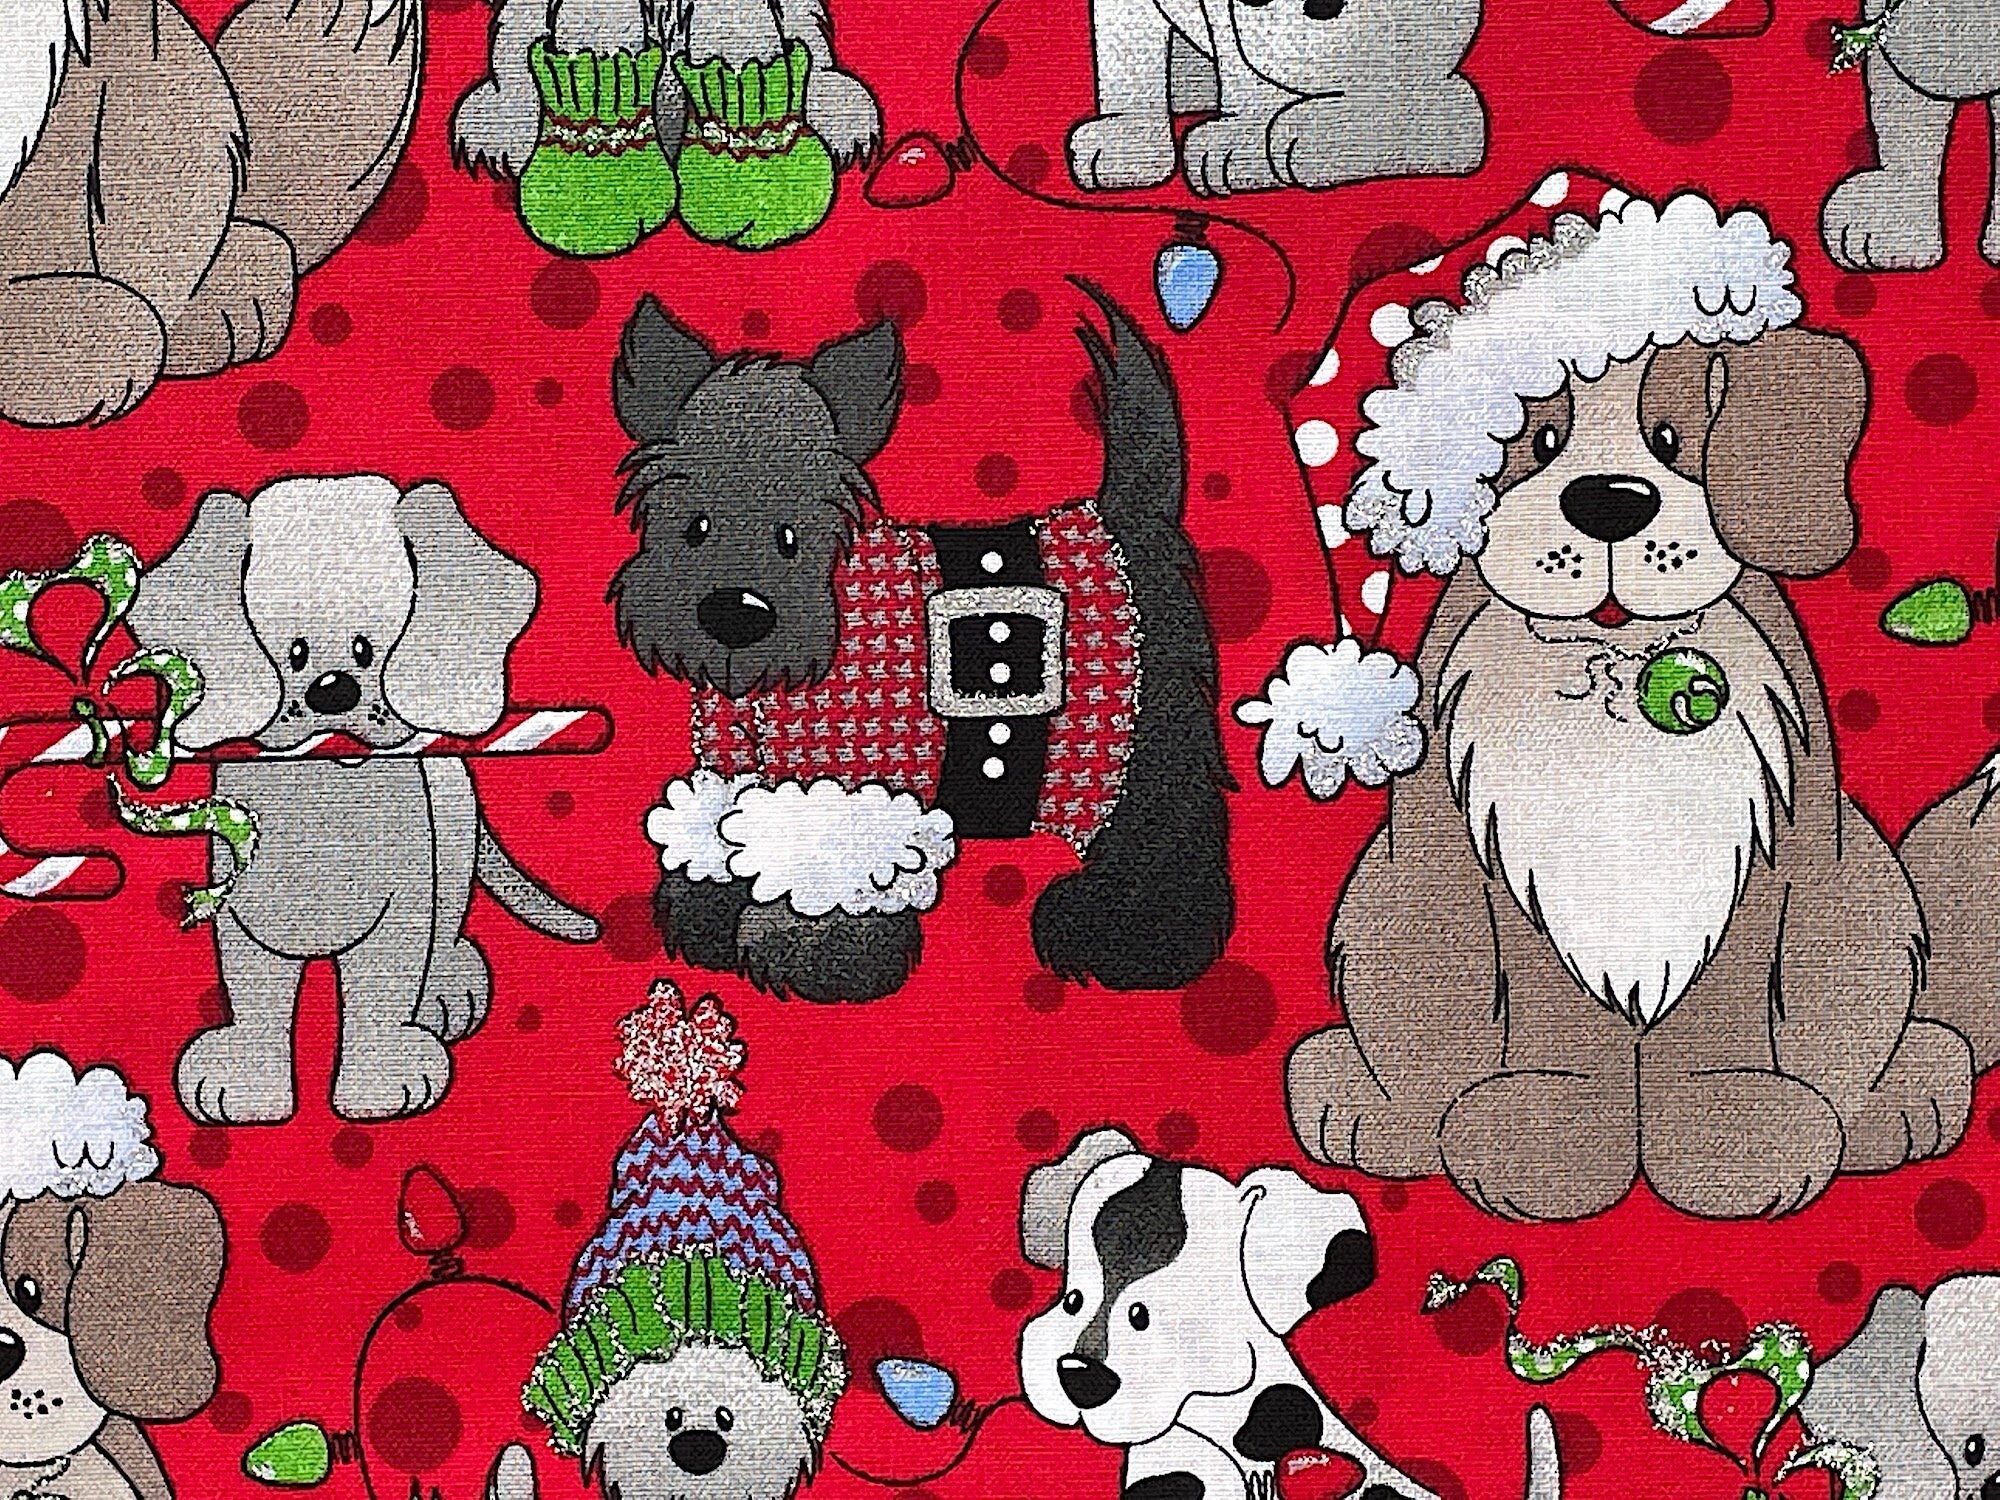 Here is an adorable Christmas themed dog fabric. It has cute small and large dogs with some wearing Xmas hats and holding a string of Christmas lights in their mouth. The Scottie dog wearing a red and gray check sweater, and the gray puppy has a candy cane in his mouth.